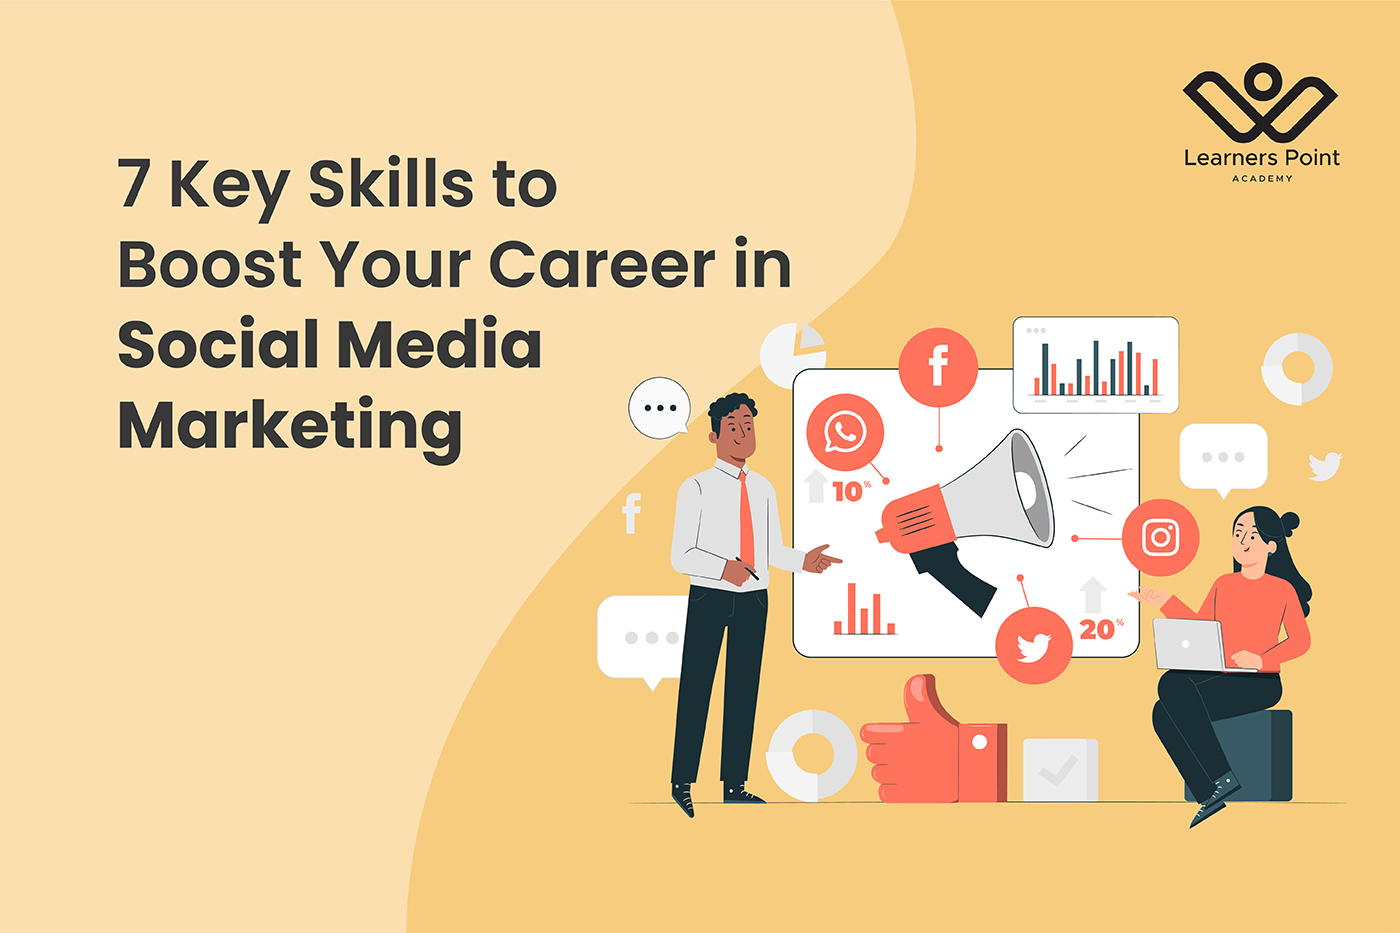 7 Key Skills to Boost Your Career in Social Media Marketing